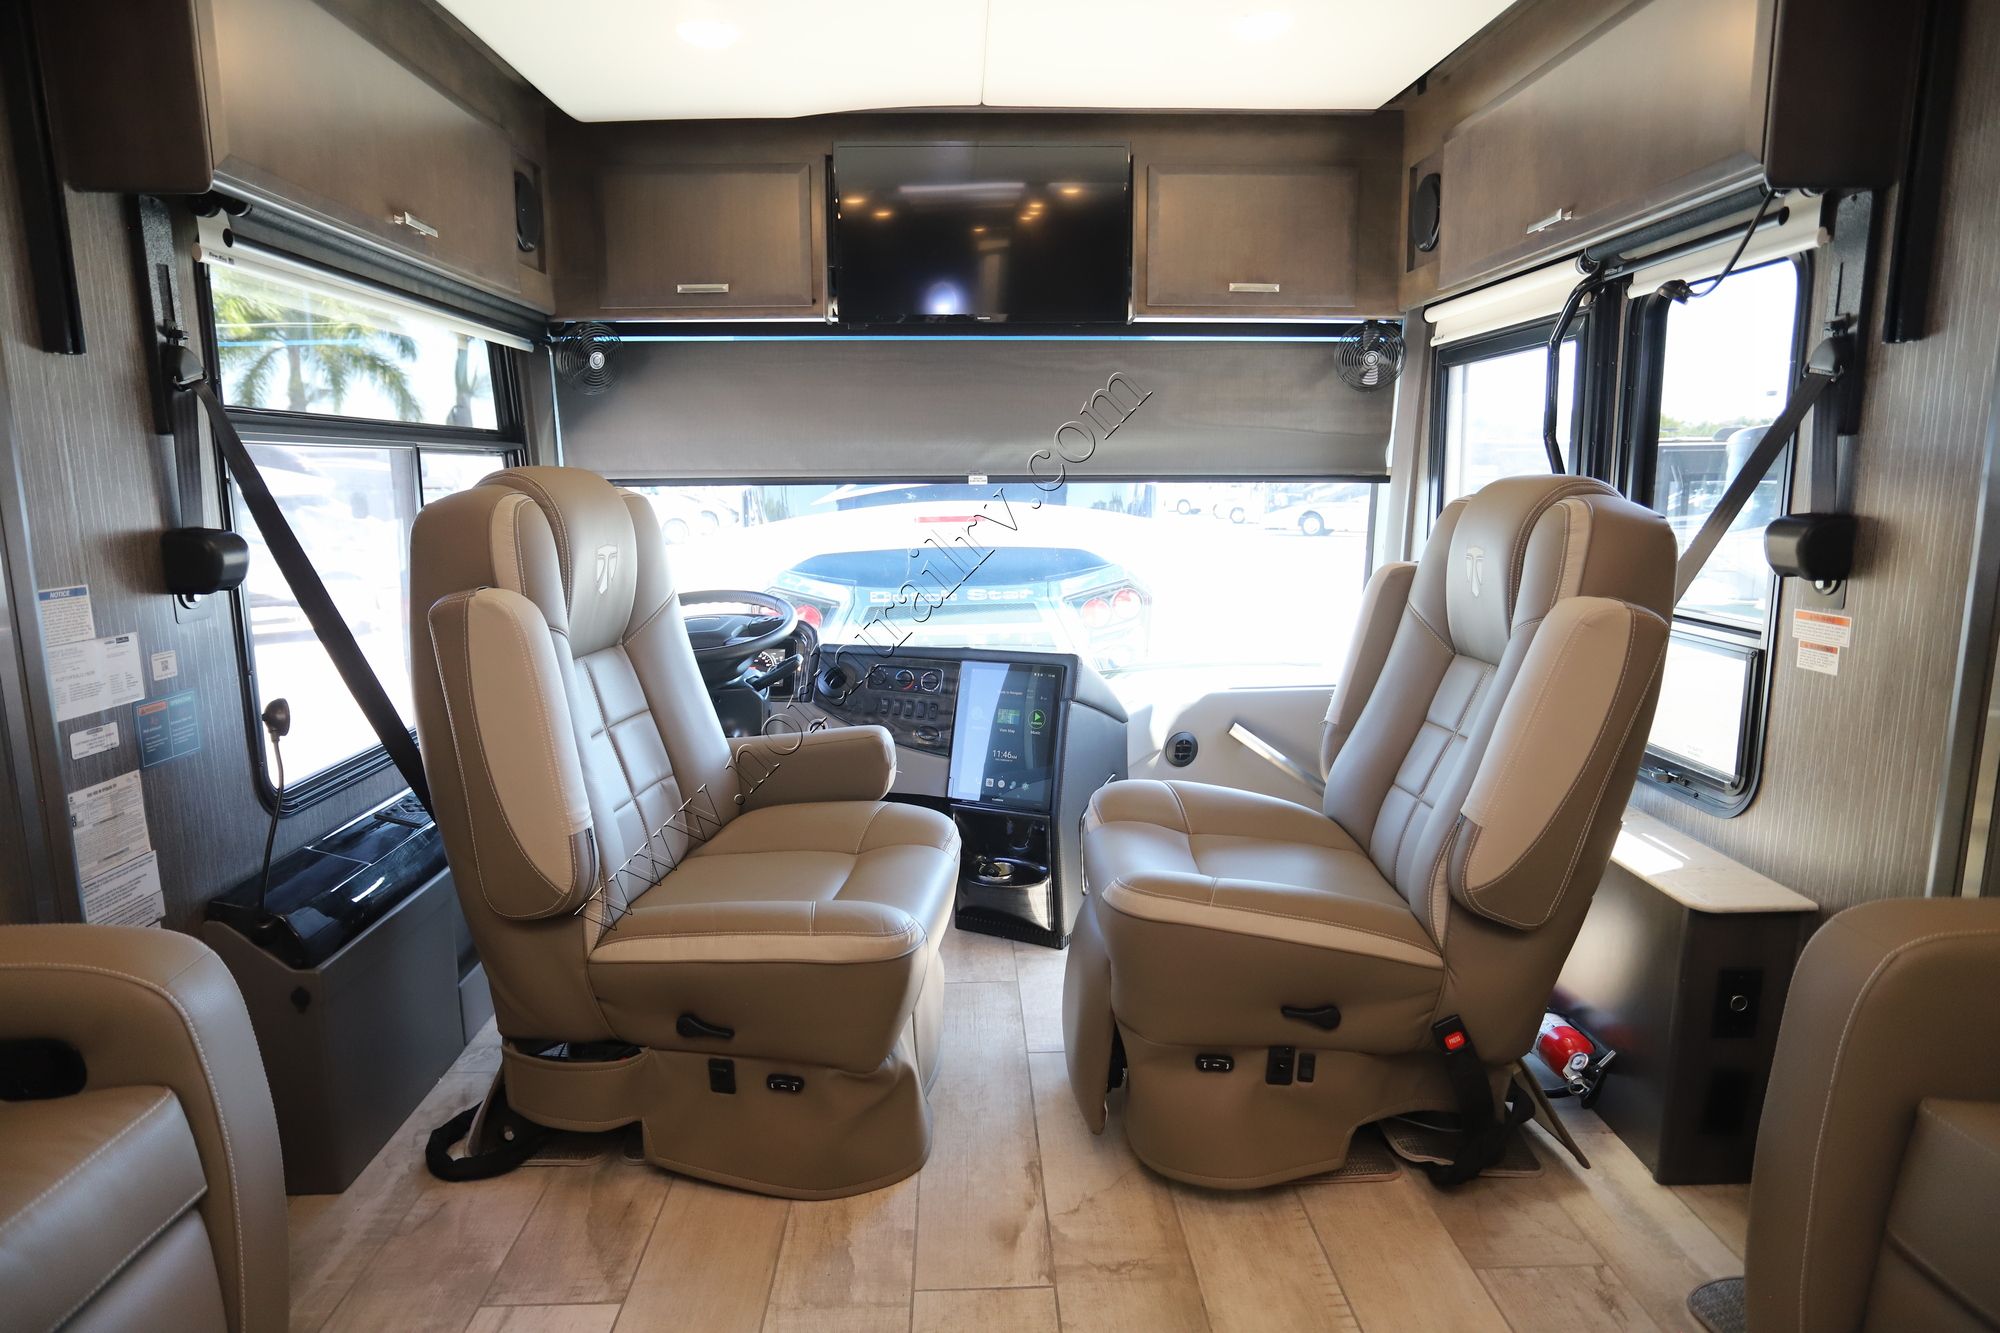 Used 2020 Thor Tuscany 45JA Class A  For Sale